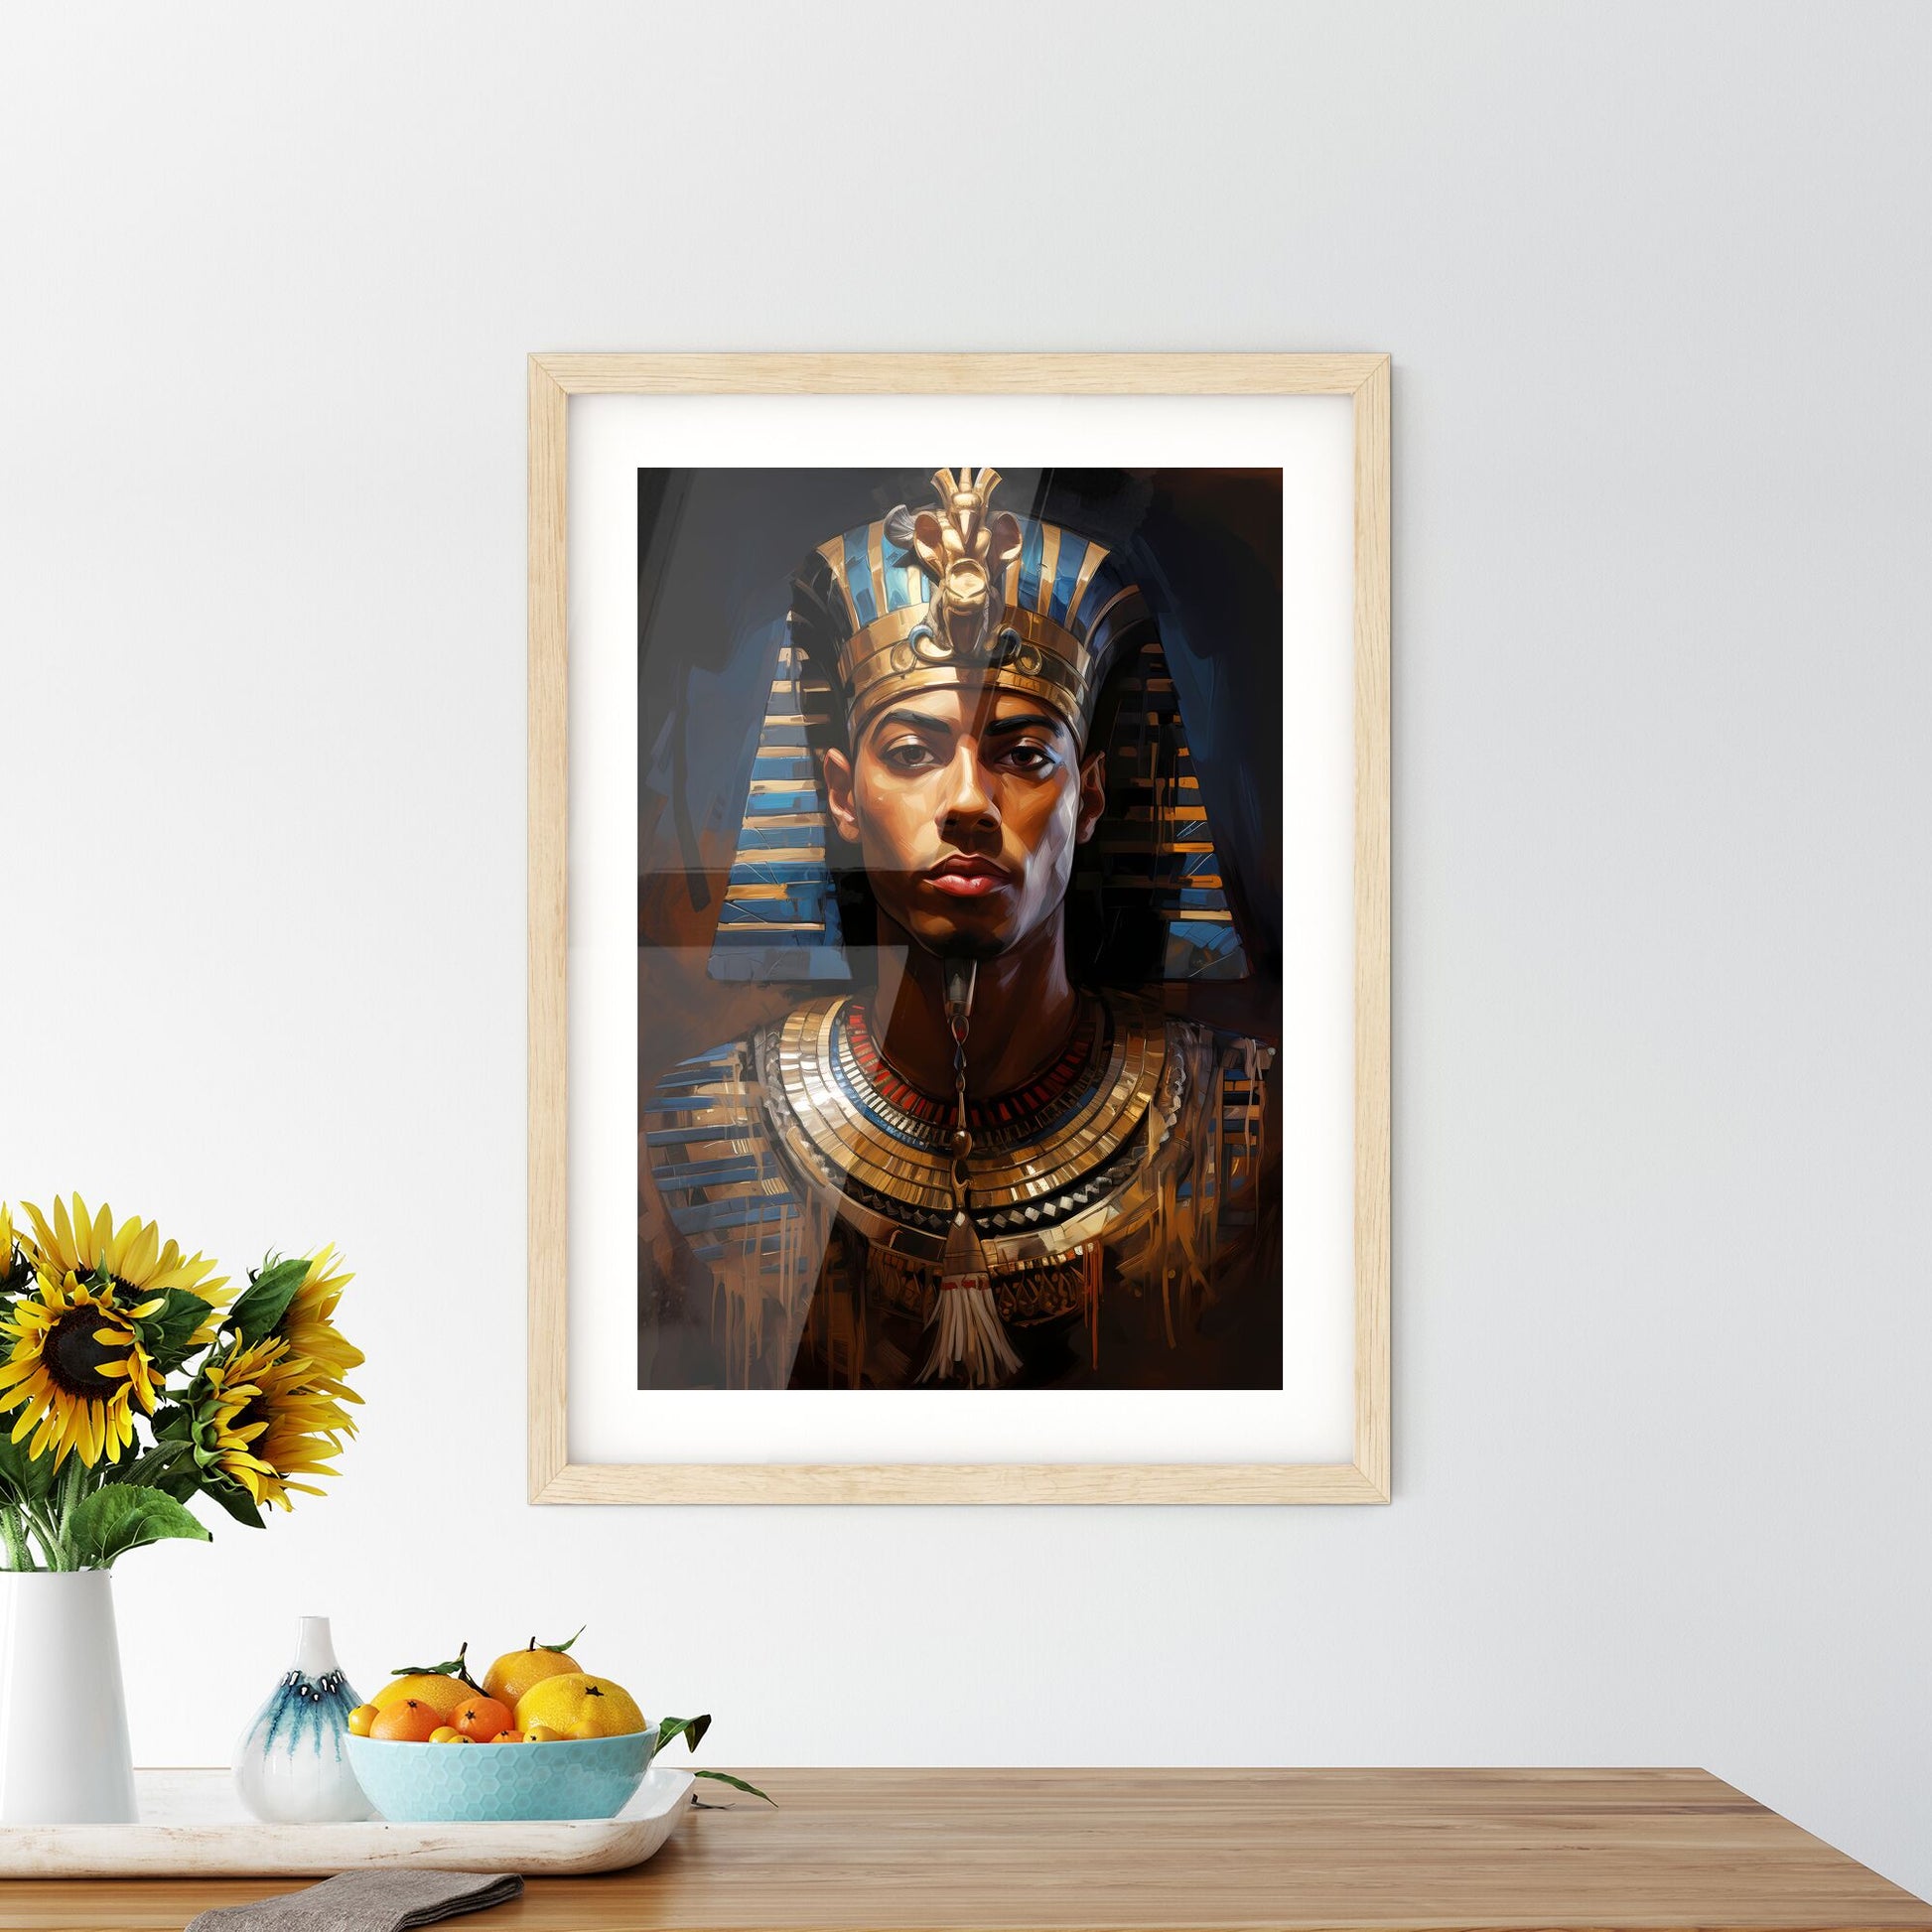 Amenhotep Iii Pharaoh Of Egypt - A Man Wearing A Gold And Blue Egyptian Garment Default Title